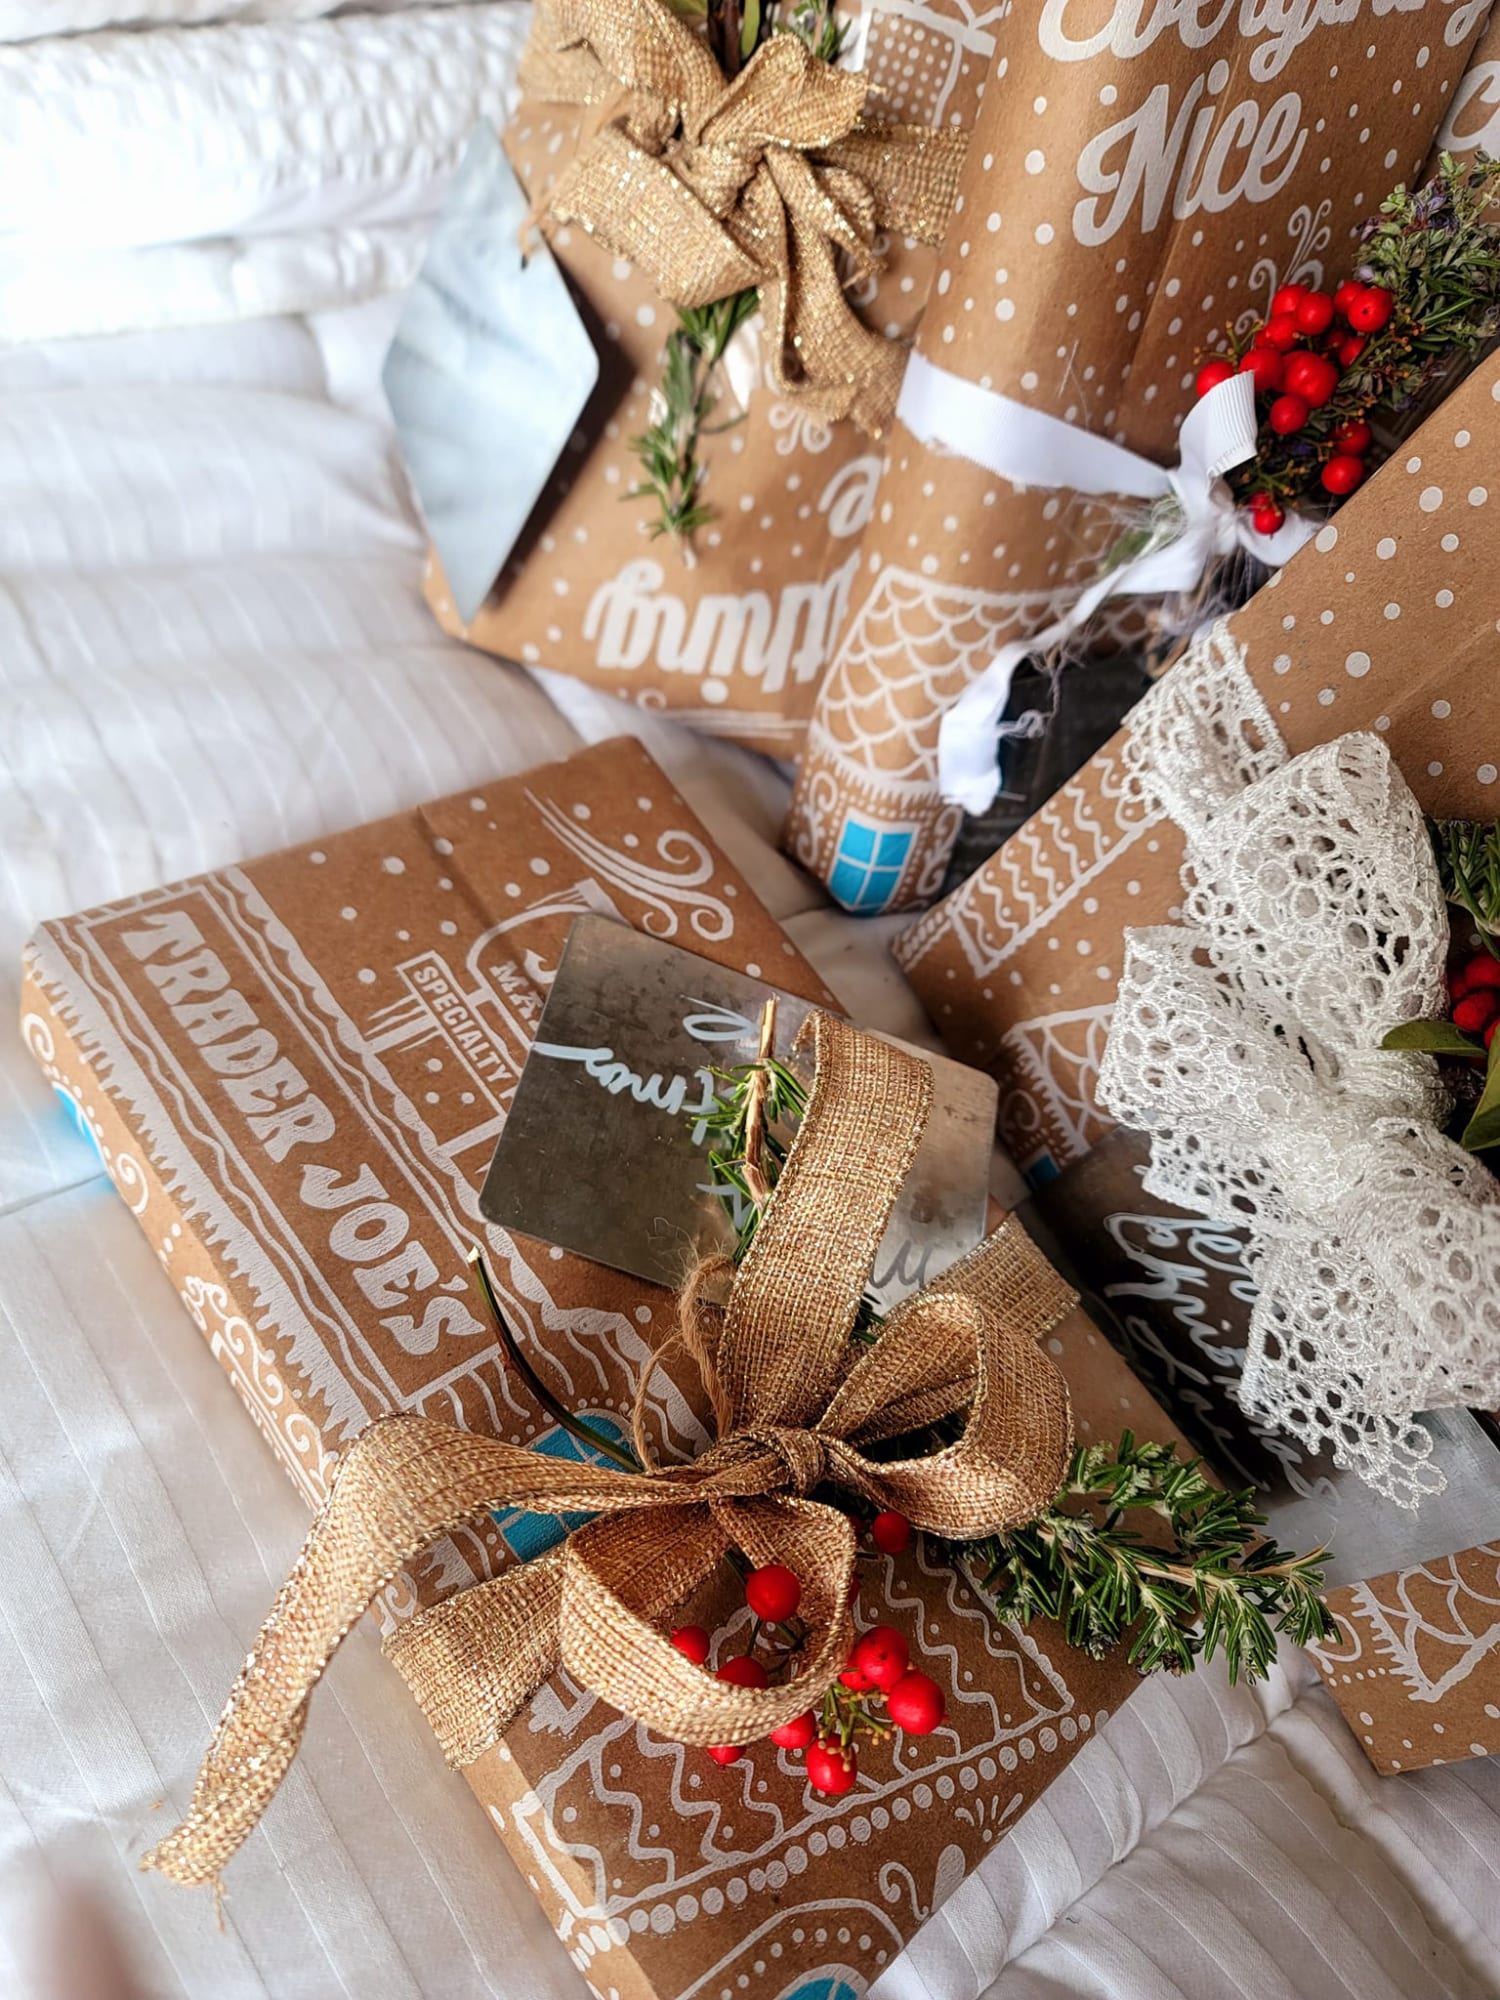 Crafty Parents Use Trader Joe's Bags to Wrap Christmas Gifts